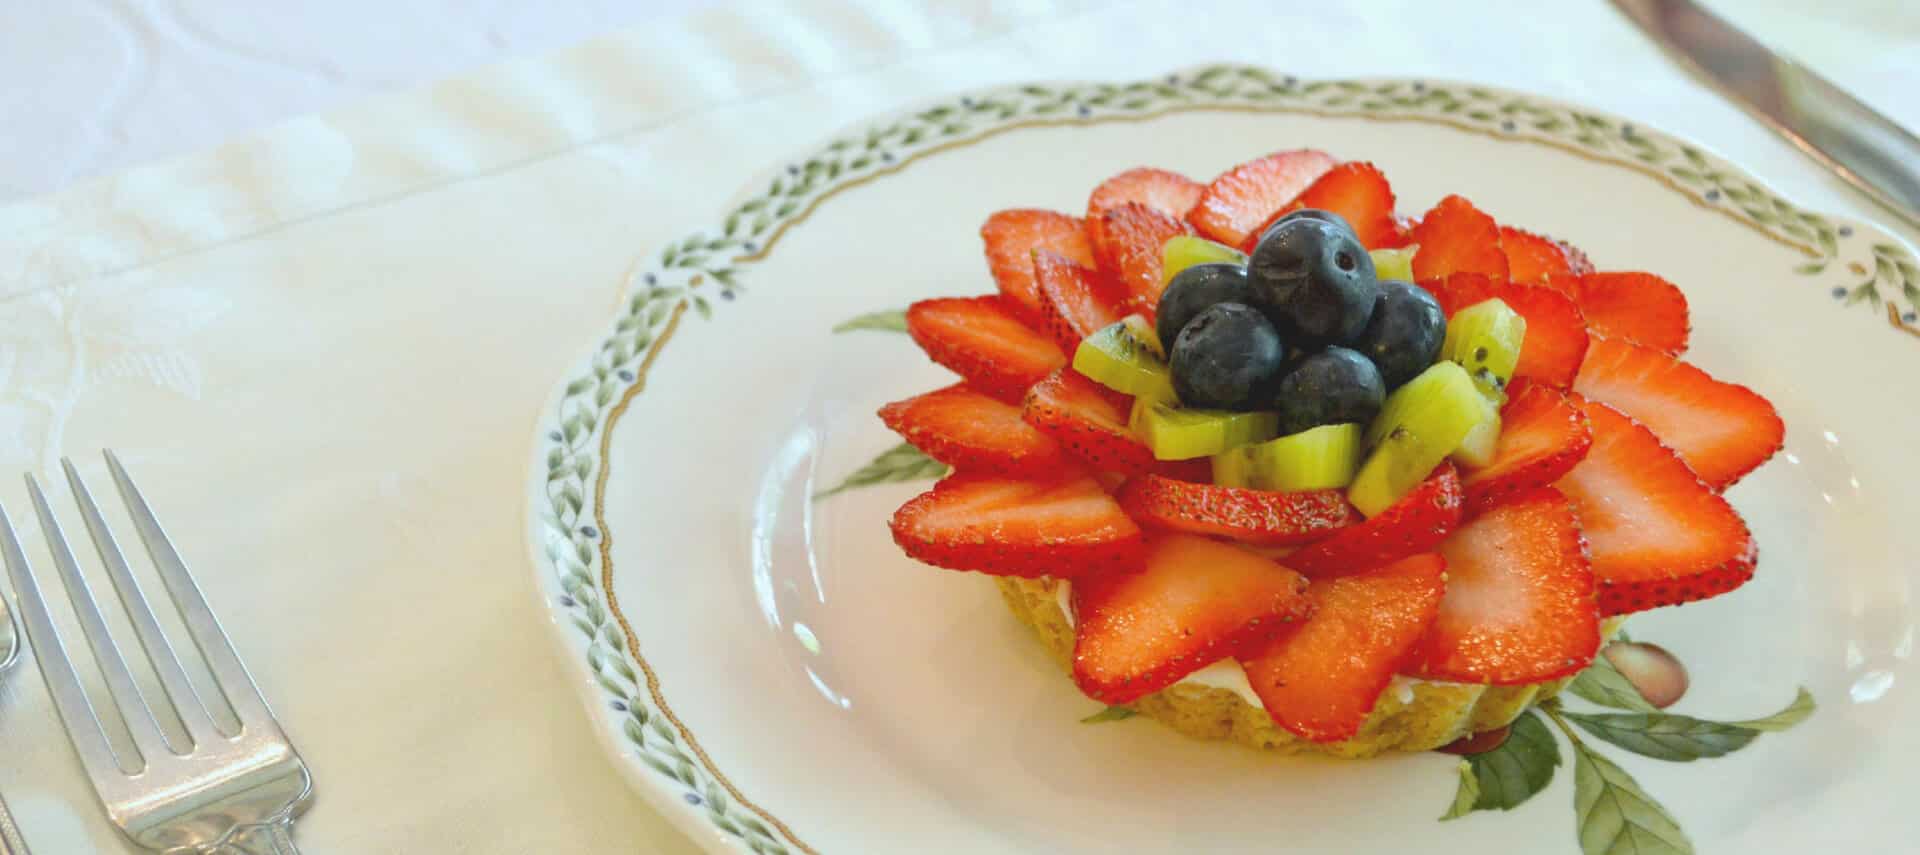 Fruit tart with strawberries, kiwi and blueberries on a china plate.